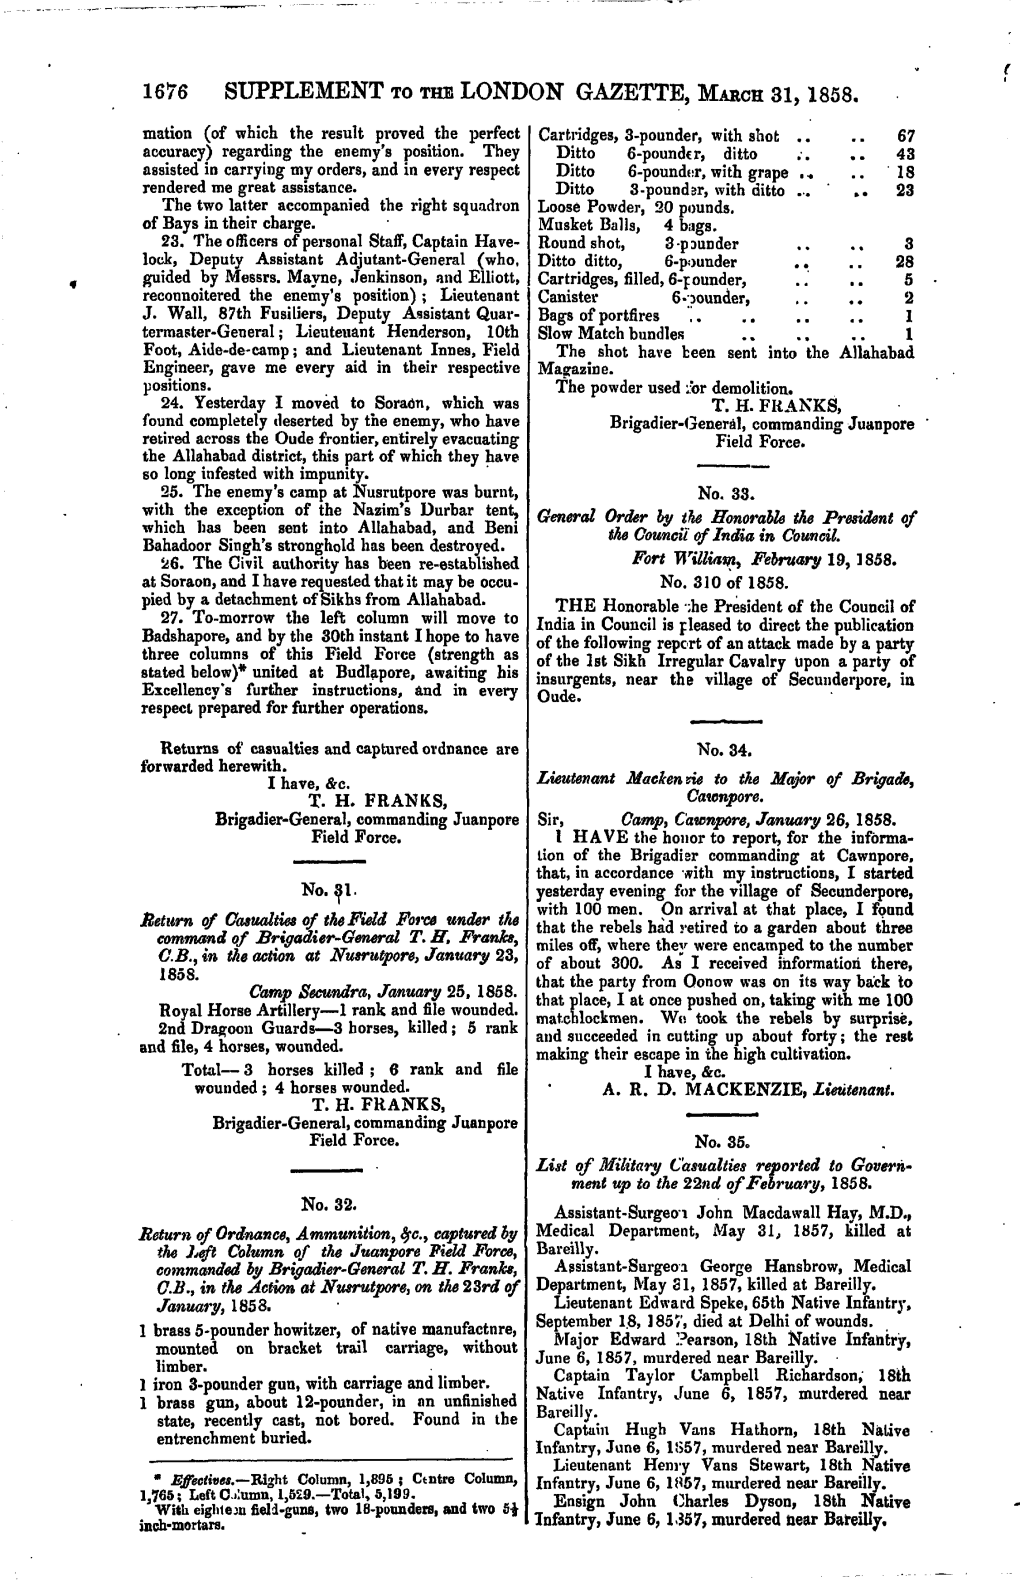 1676 Supplement to the London Gazette, March 31,1858